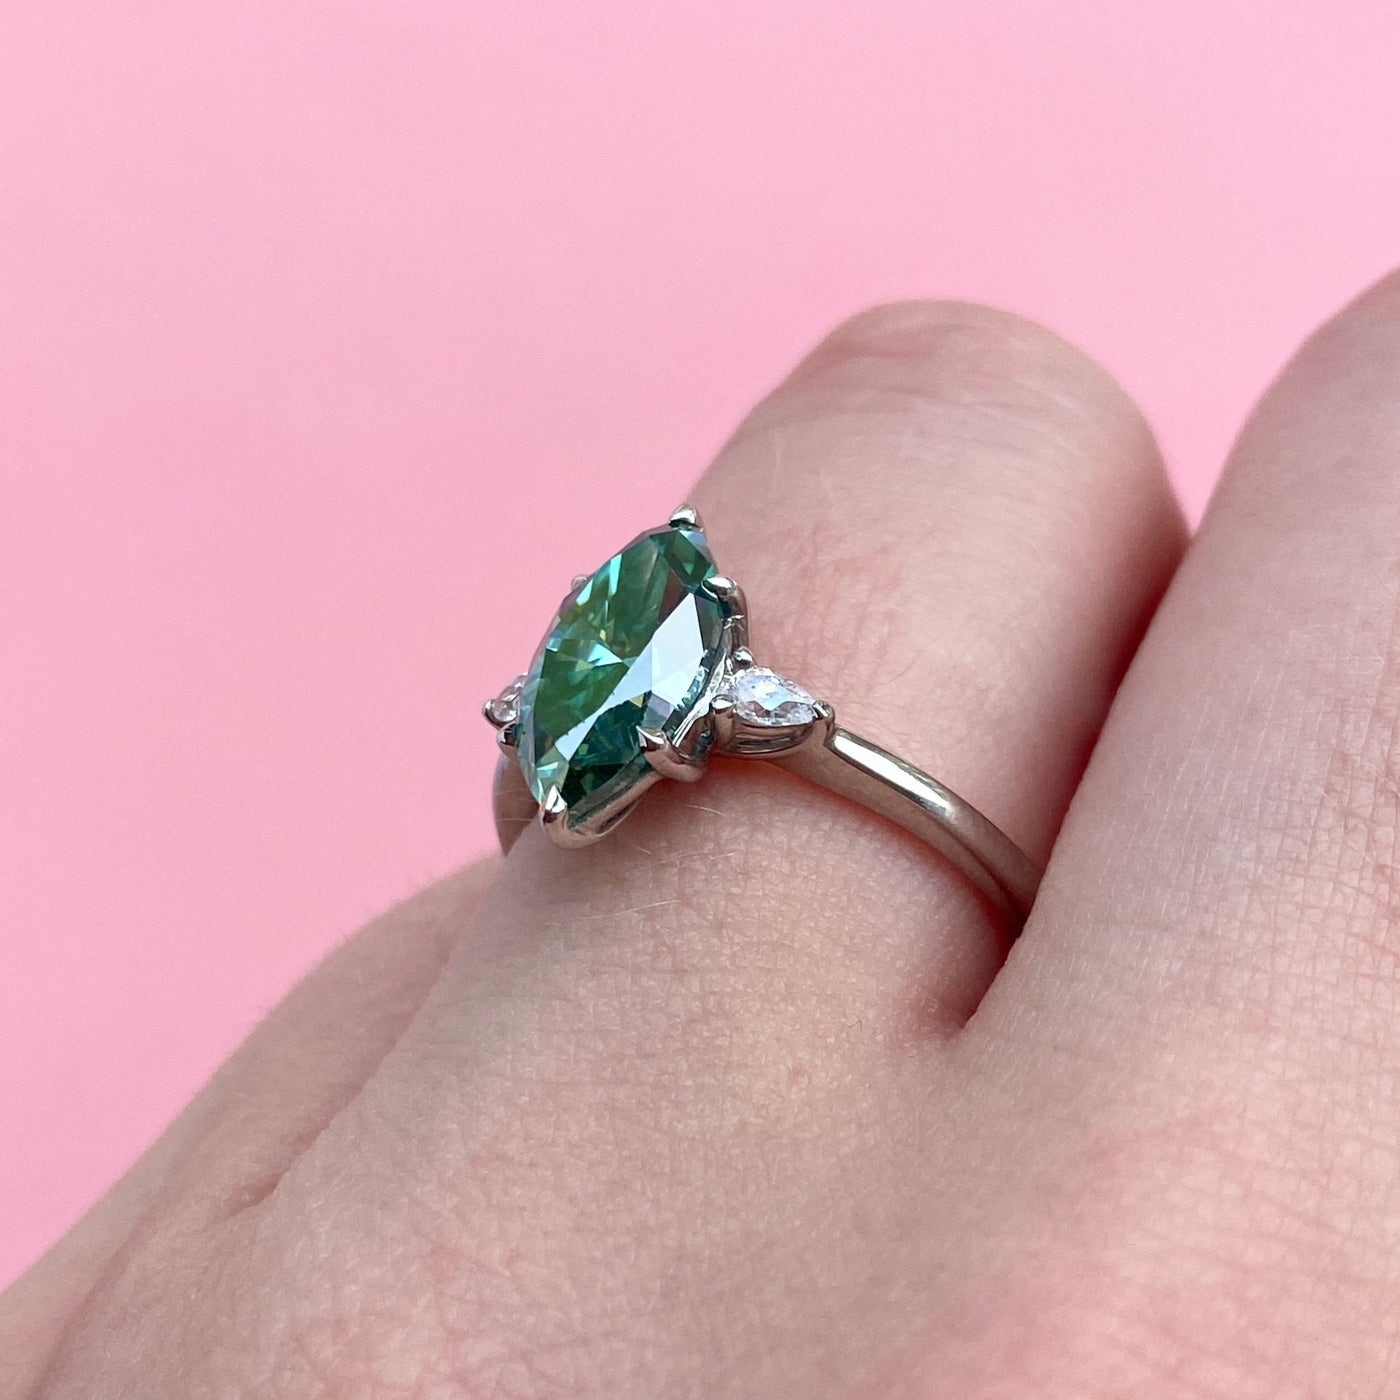 Elspeth - Marquise Cut Teal Moissanite Engagement Ring with Pear Cut Side Stones - Custom Made-to-Order Design